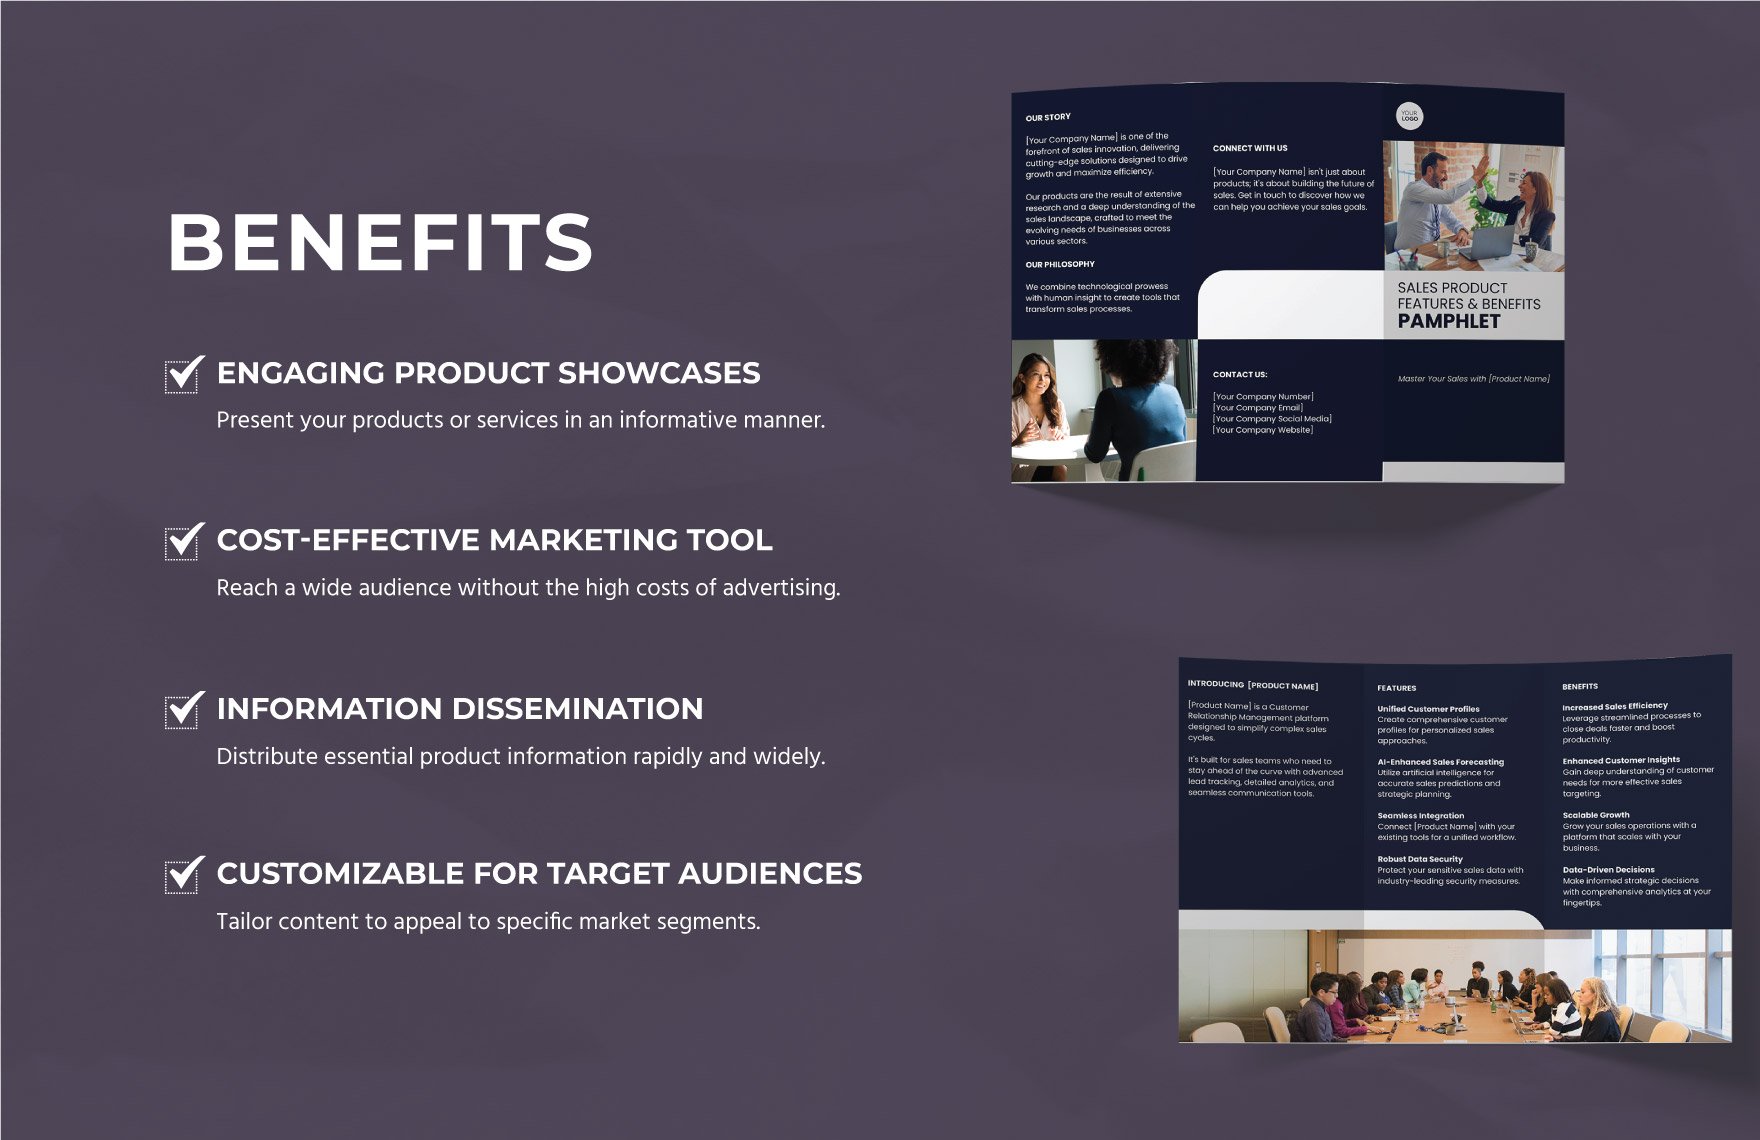 Sales Product Features and Benefits Pamphlet Template